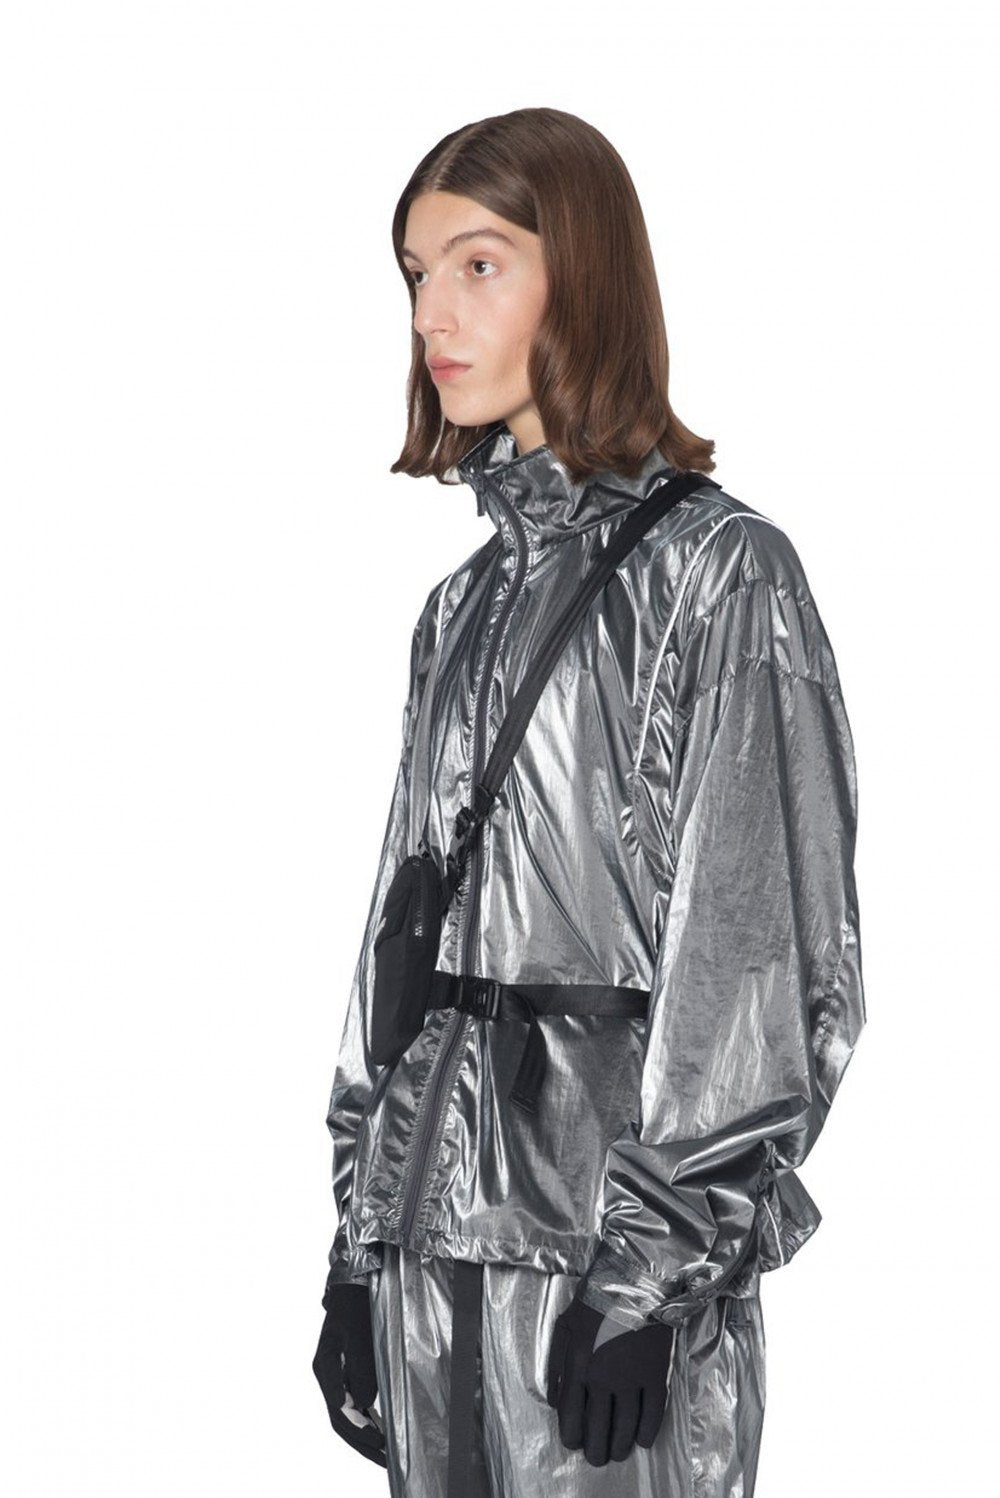 CWHAT 3M Reflective Puffer Jacket